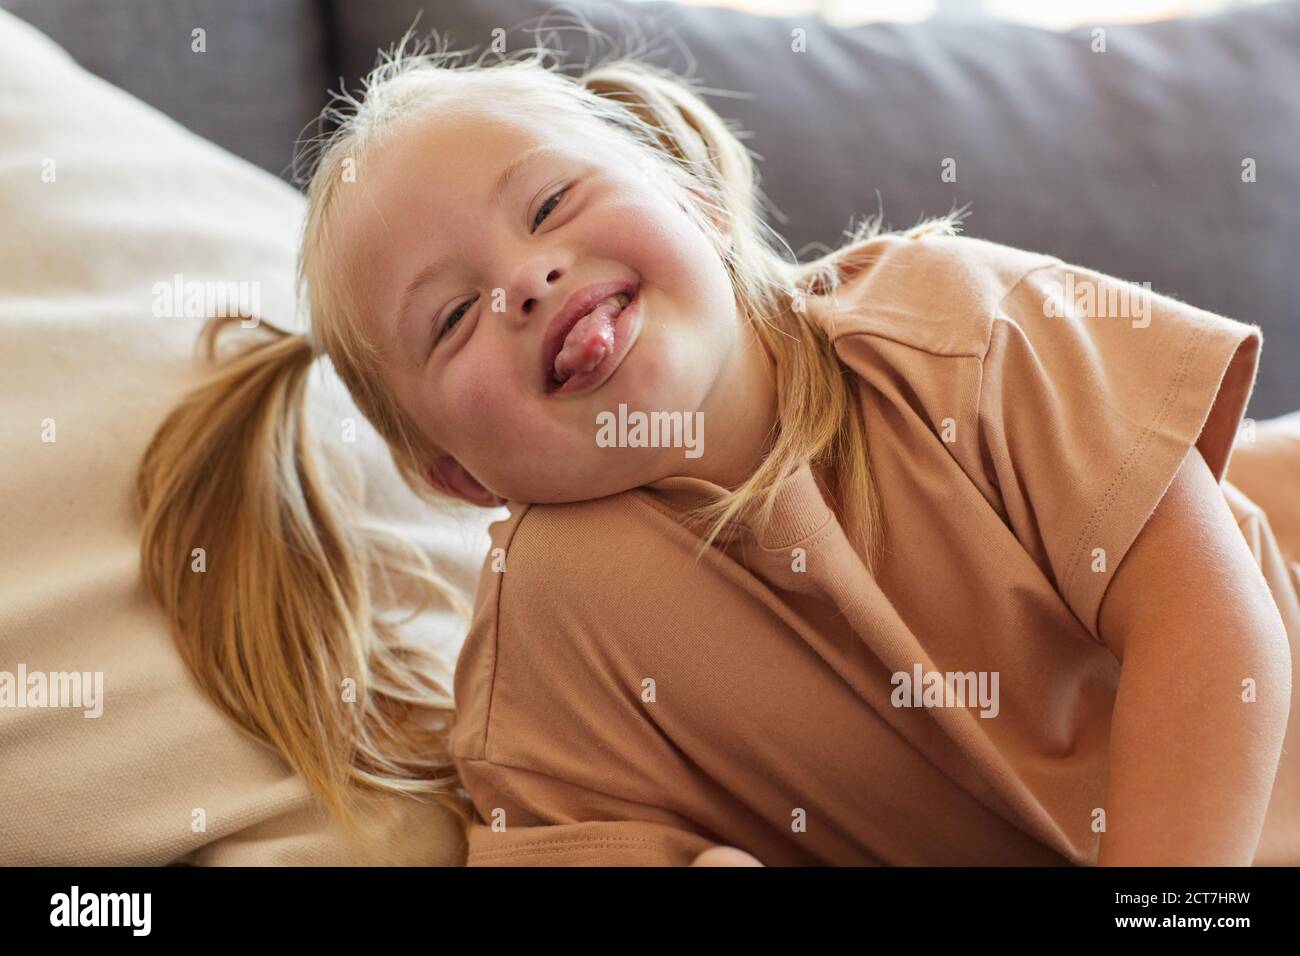 Portrait of carefree little girl with down syndrome sticking tongue out while grimacing for camera Stock Photo